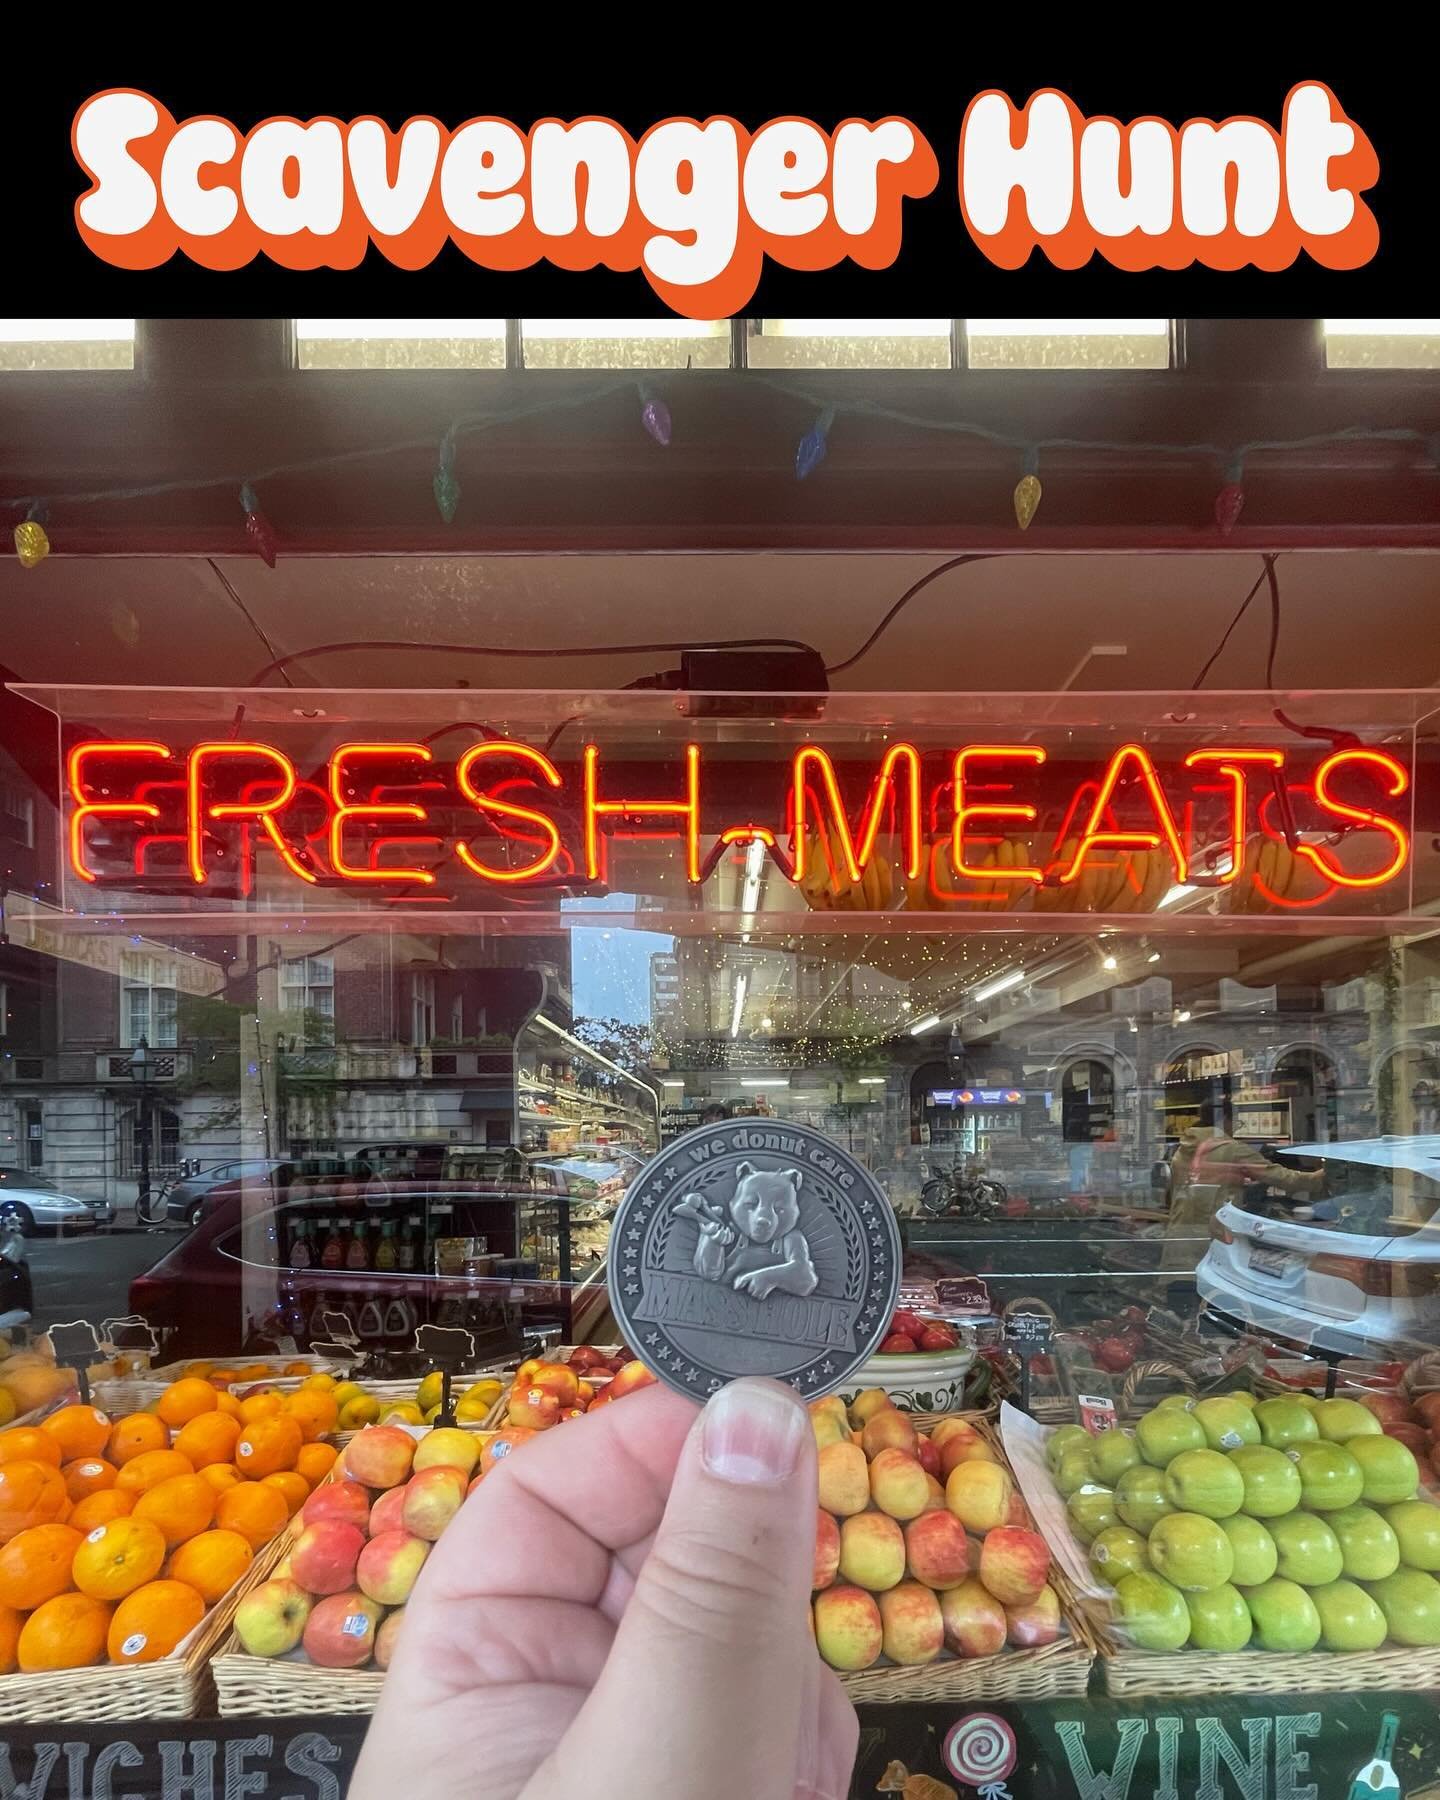 Looking for something to do on a cold rainy day? Come to @delucasmarket and see if you can find this hidden coin. Winner gets a free six pack. Here&rsquo;s the clue..

In the heart of Boston, on old Charles Street, 
There&rsquo;s a market where all t